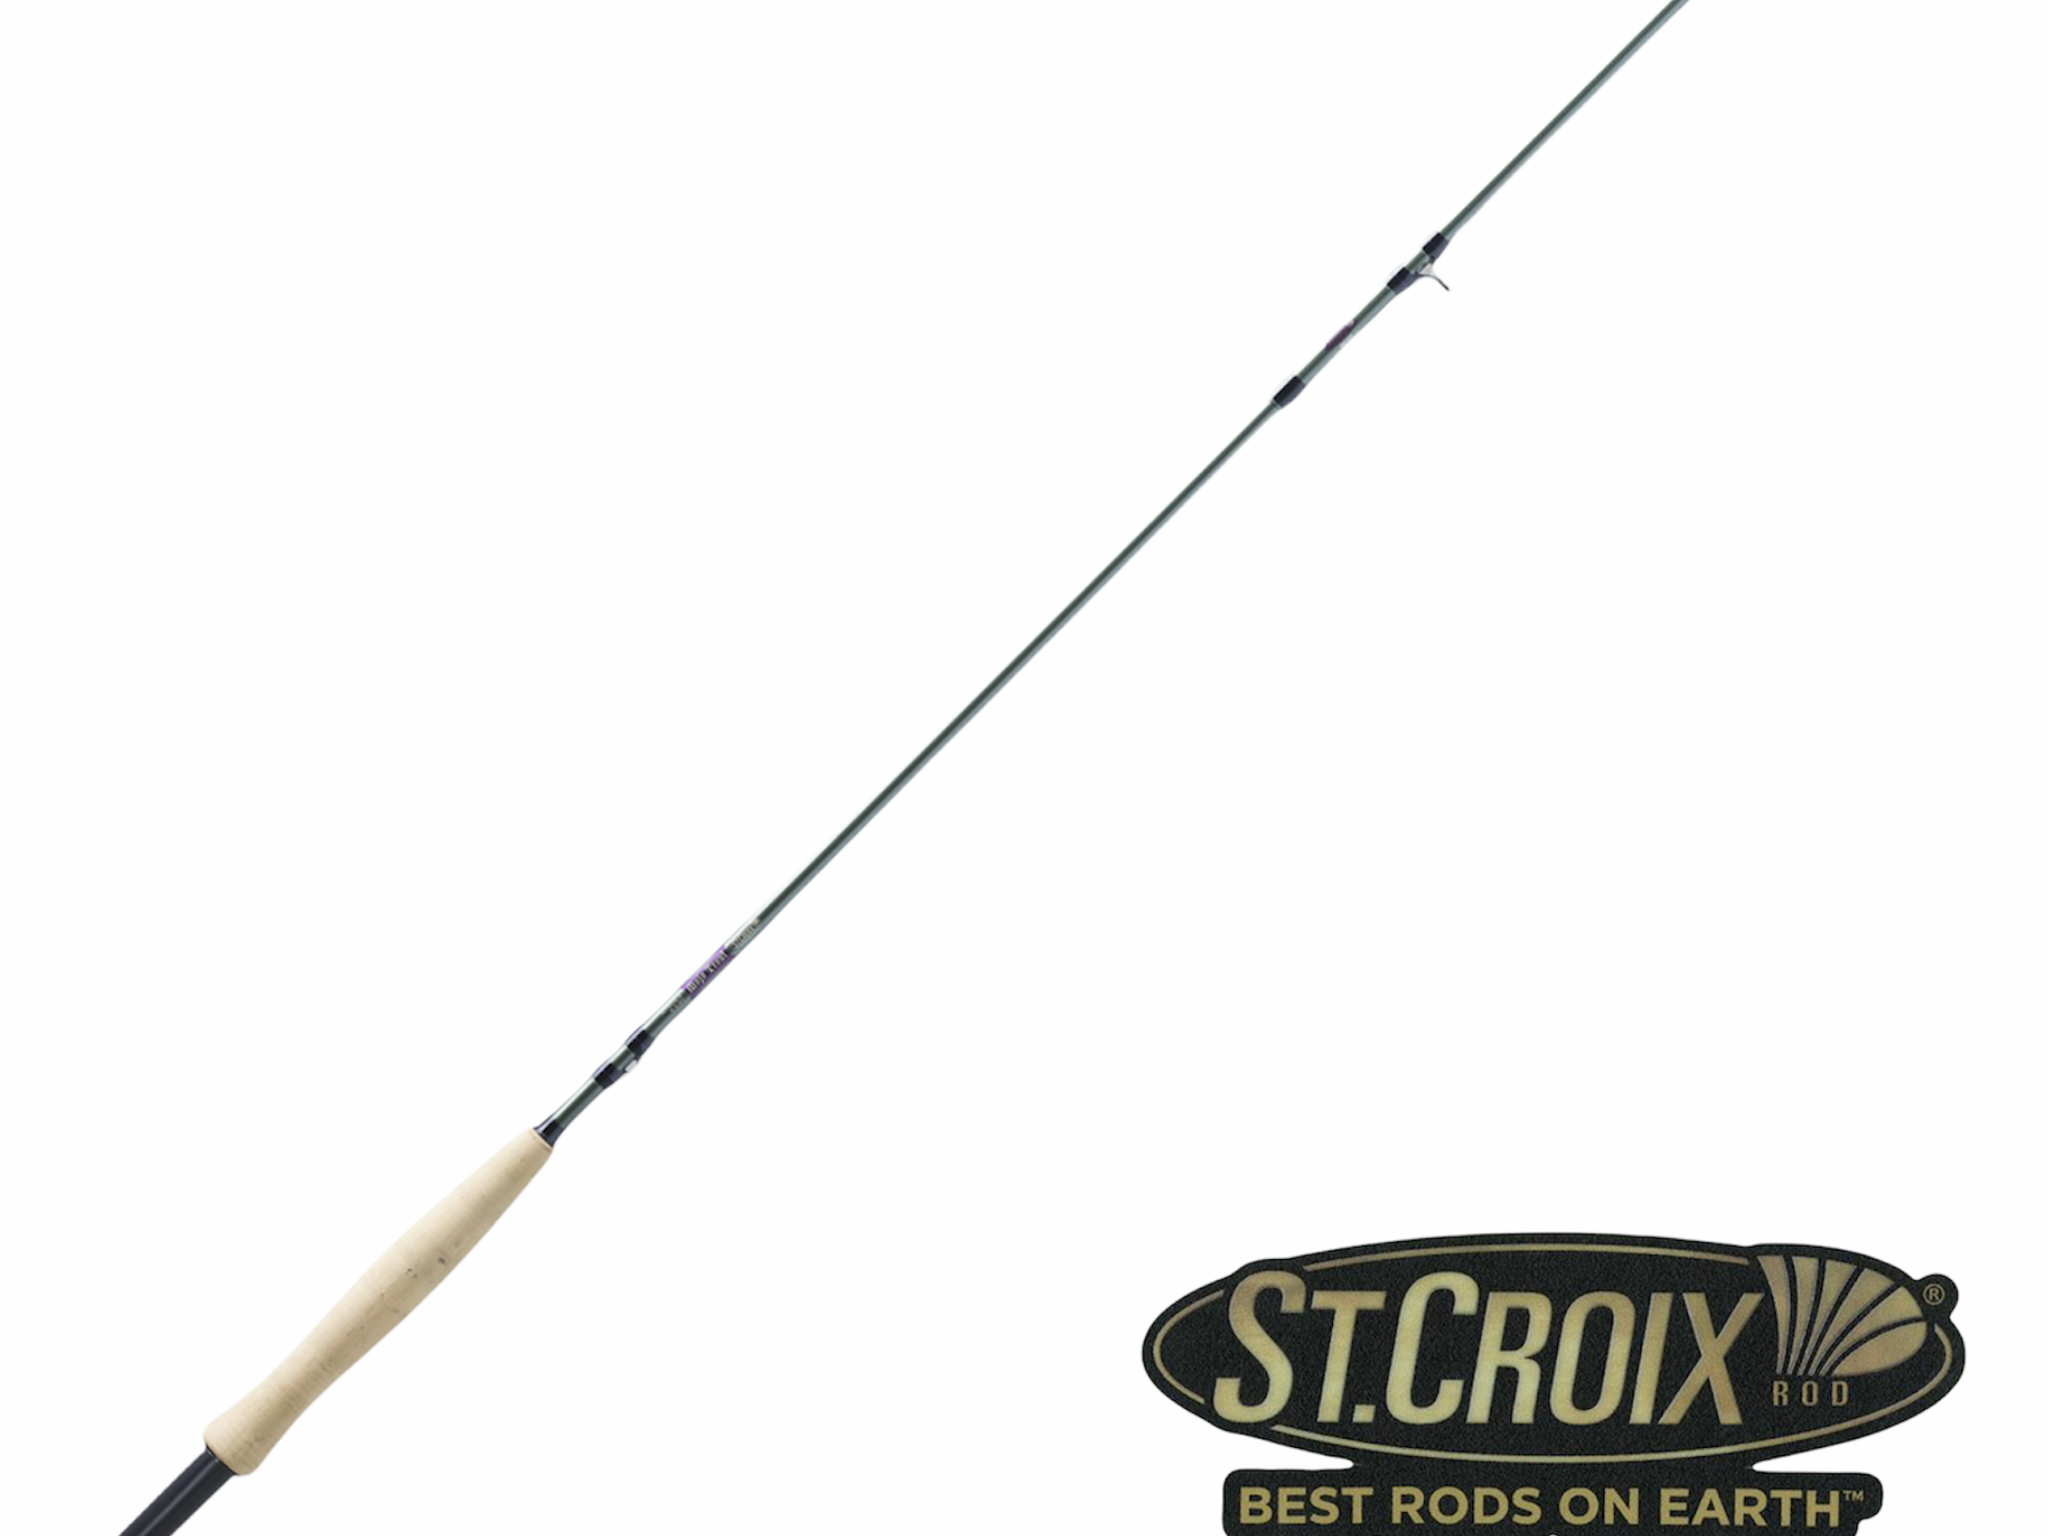 St croix mojo trout 9ft 5wt – Lazy river road outfitters